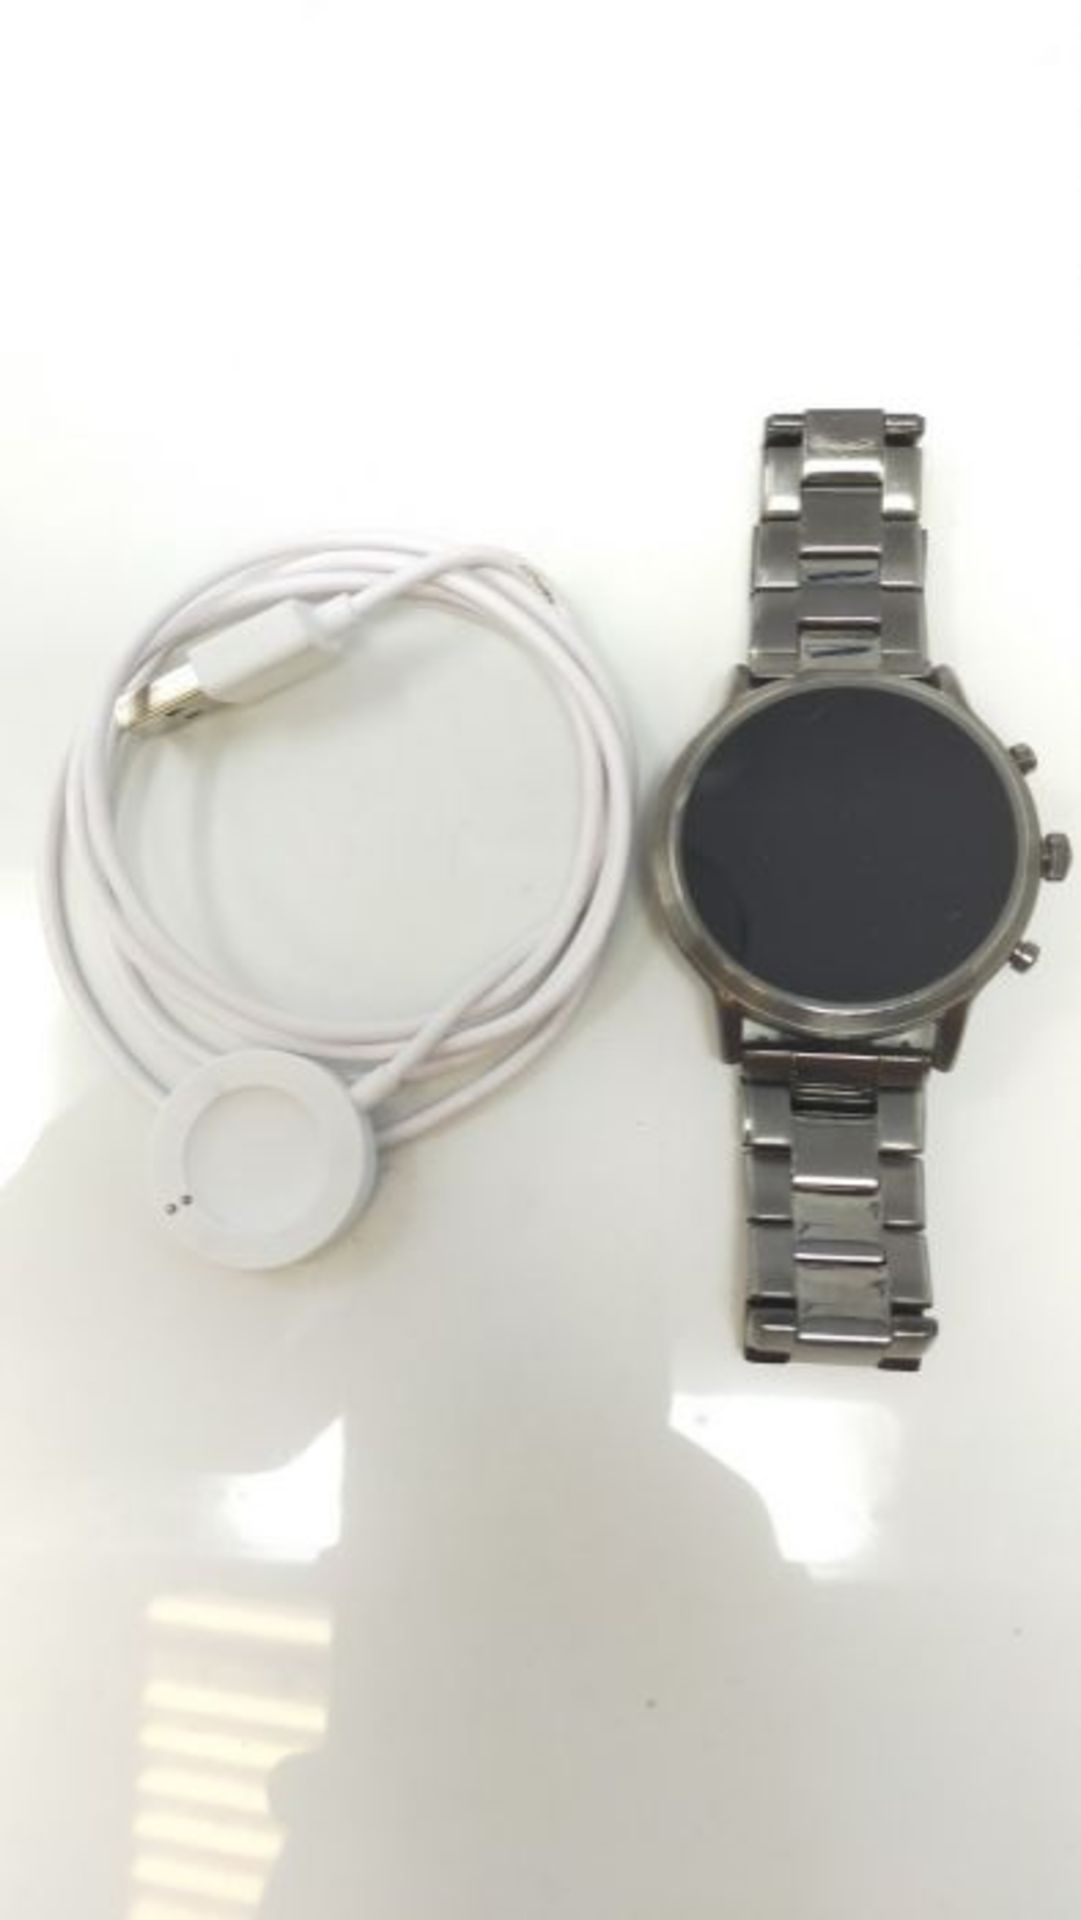 RRP £213.00 Fossil Men's Touchscreen Connected Smartwatch with Stainless Steel Strap FTW4024 - Image 3 of 3